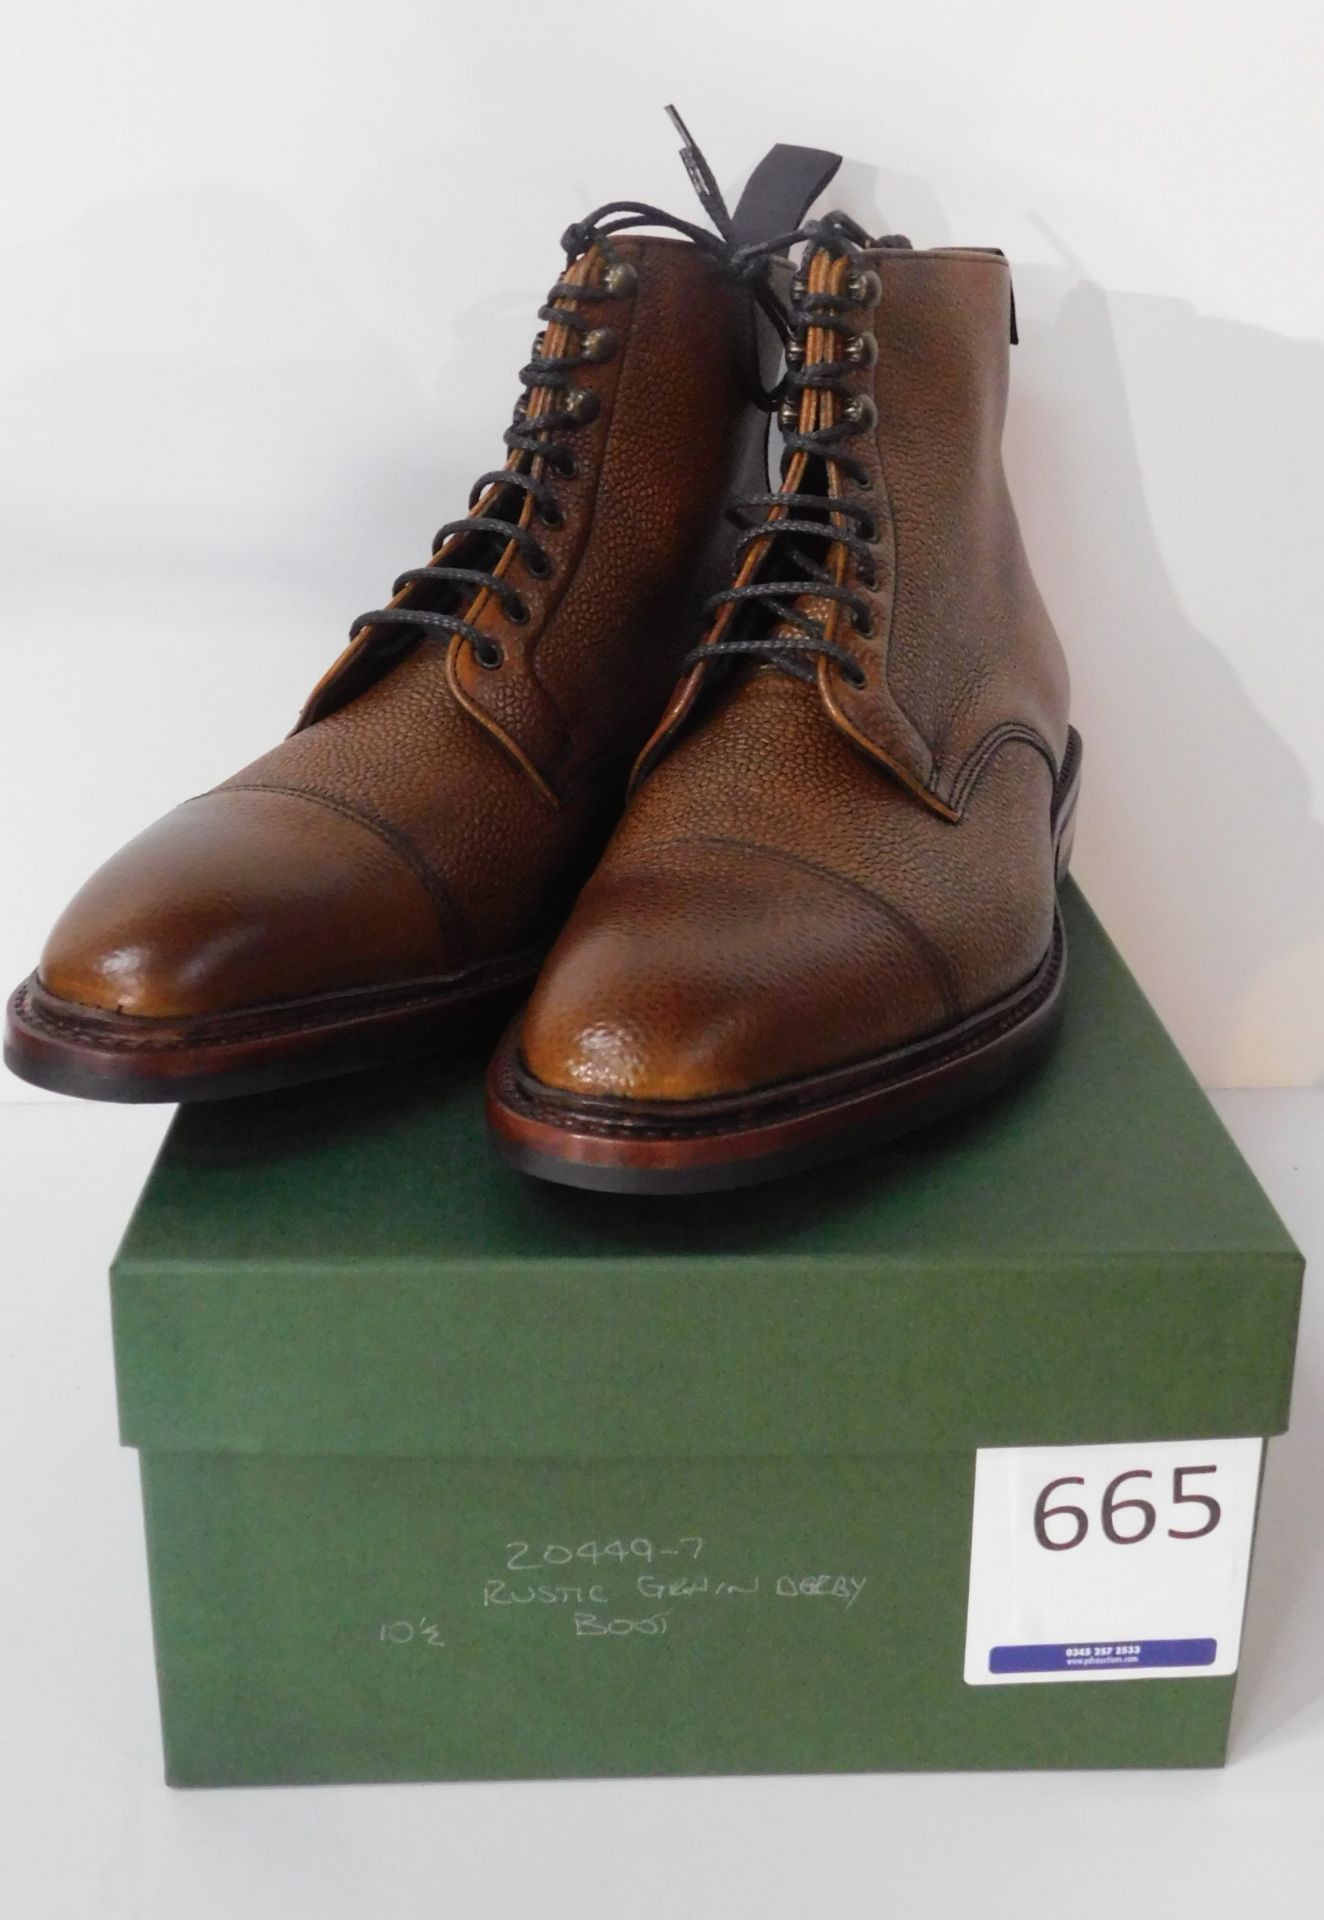 Sid Mashburn Rustic Grain Boots Size 10.5 (Slight Seconds) (Location: Brentwood – See General